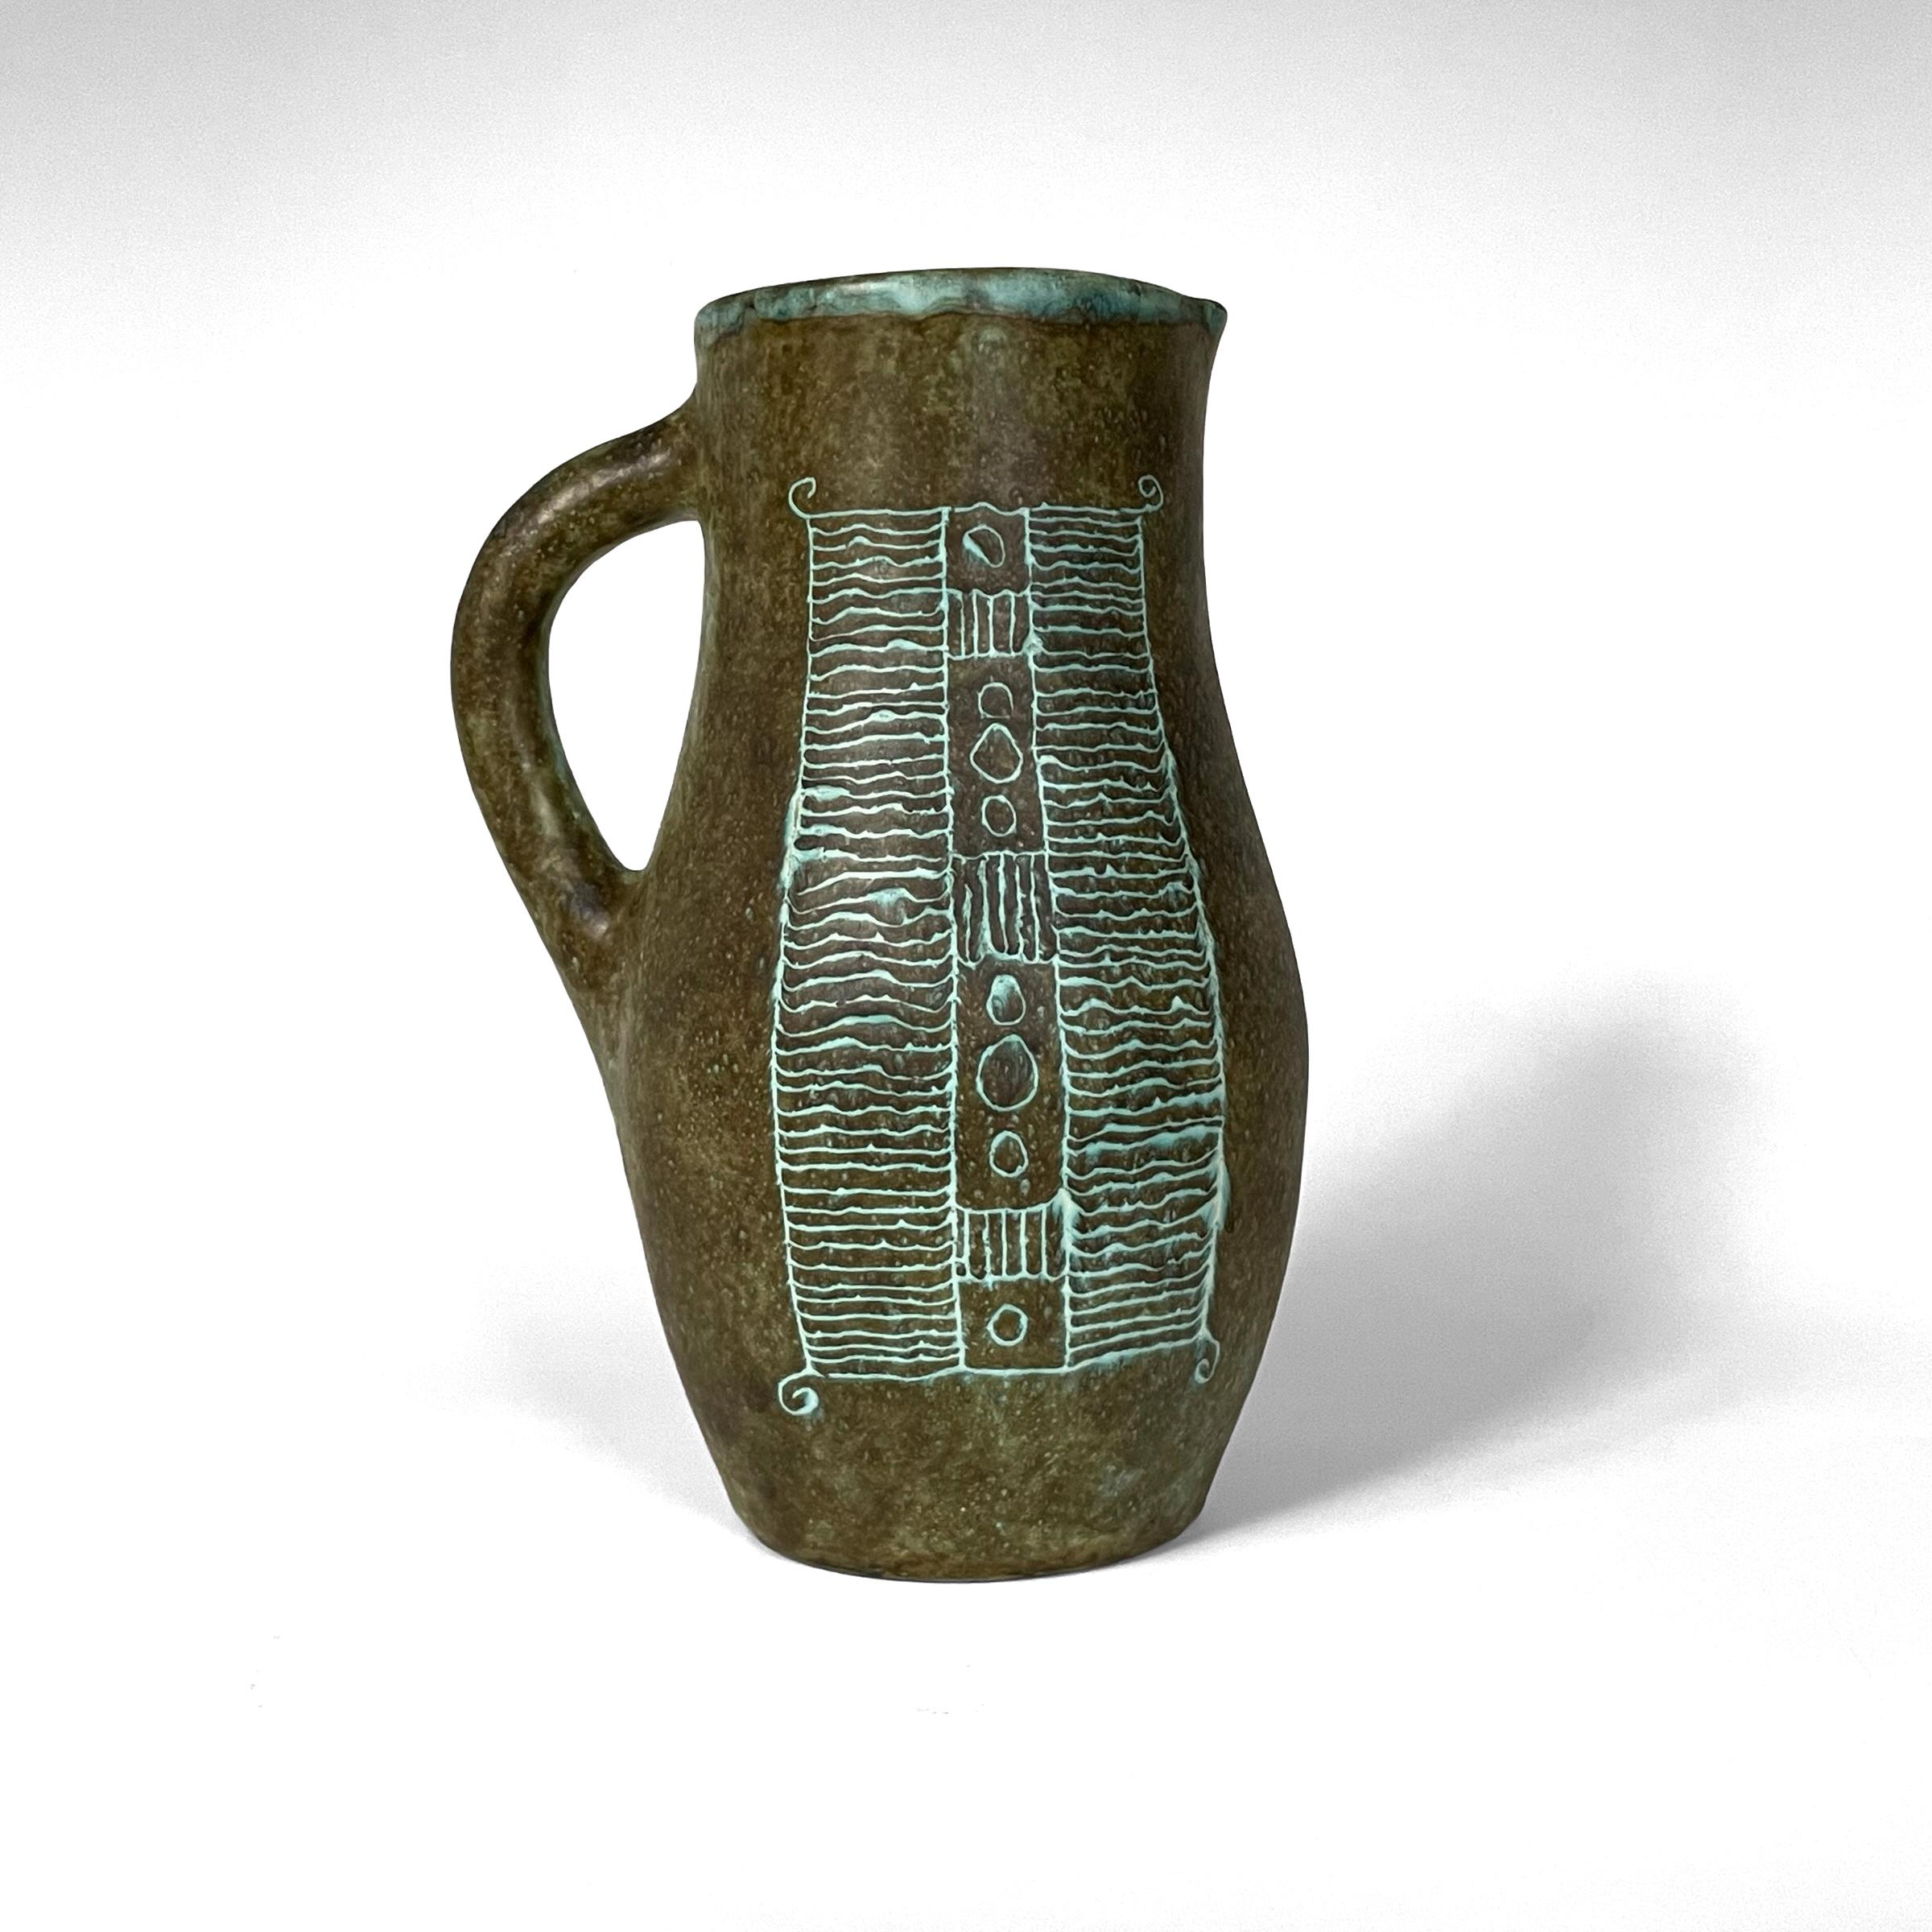 Ceramic pitcher by Jacques and Michelle Serre, Les 2 potiers, circa 1950 6